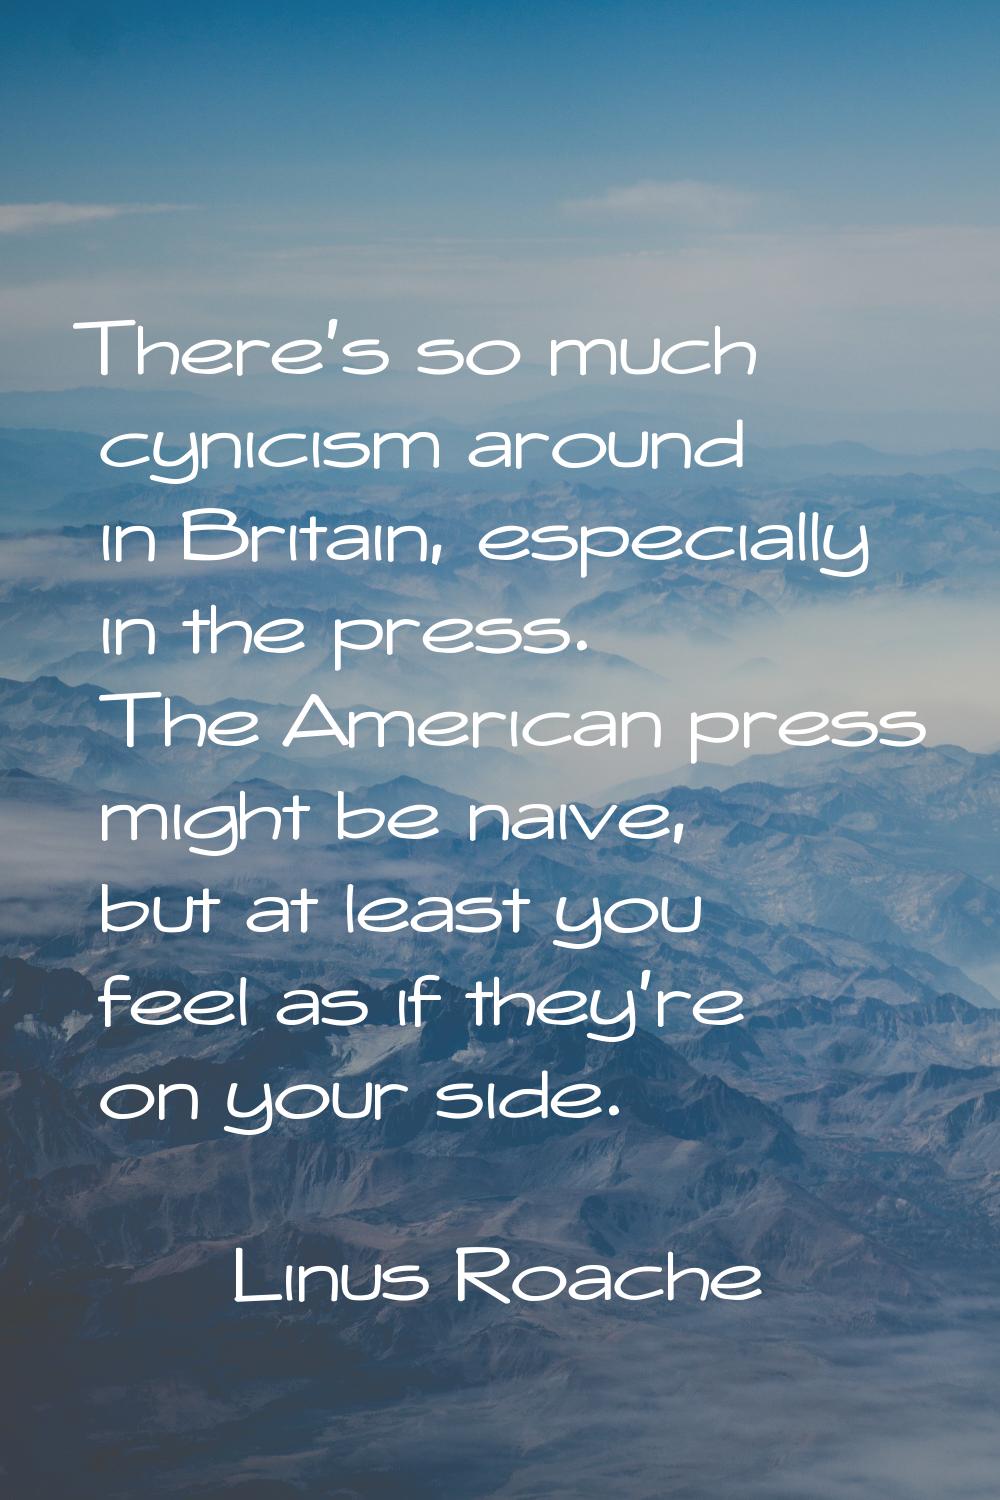 There's so much cynicism around in Britain, especially in the press. The American press might be na